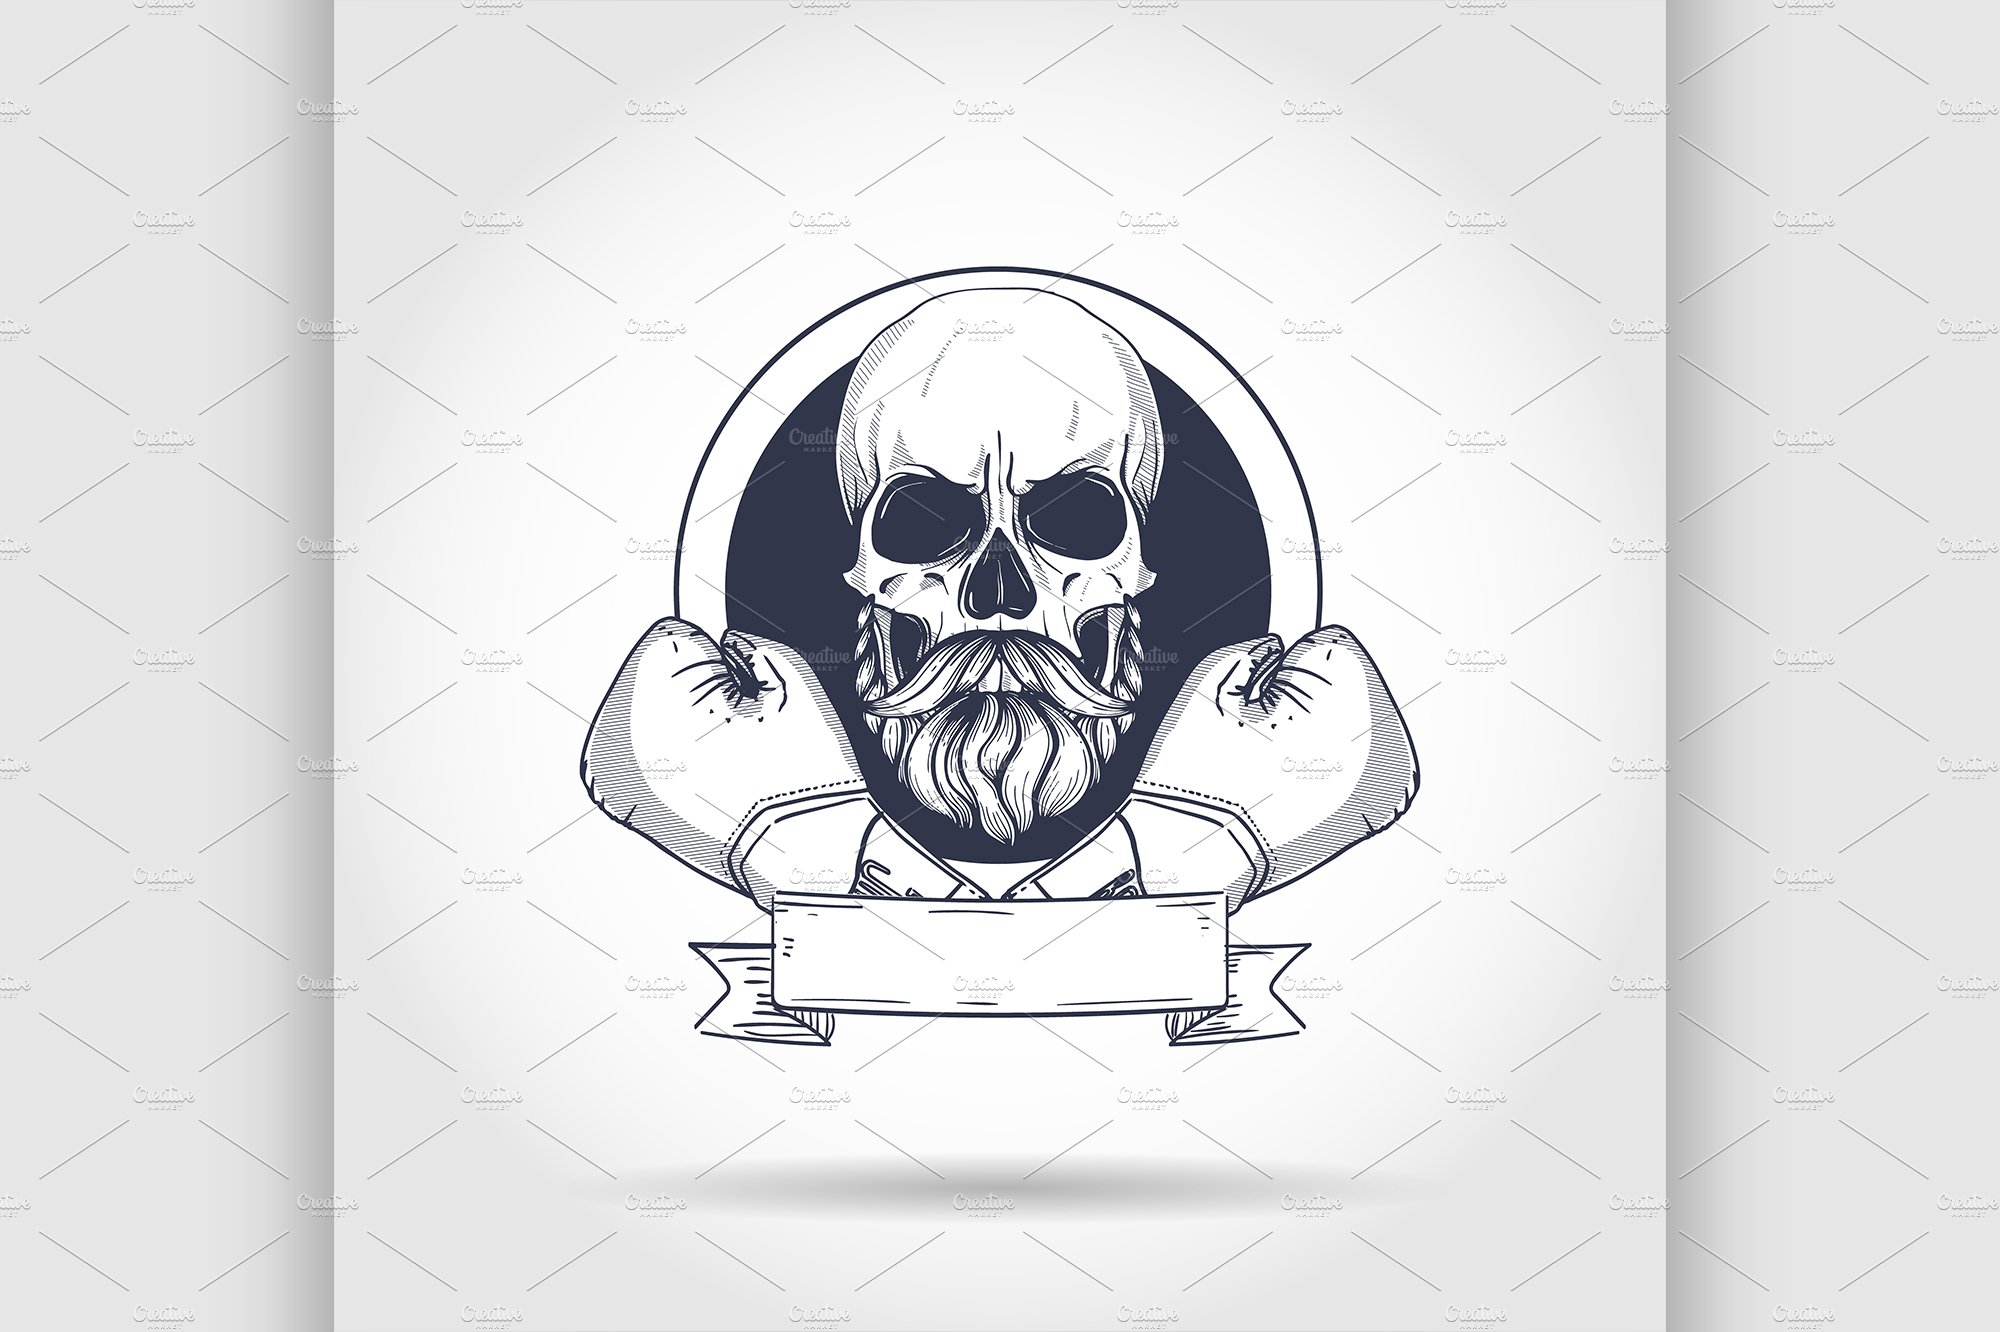 Hand drawn skull with boxing gloves cover image.